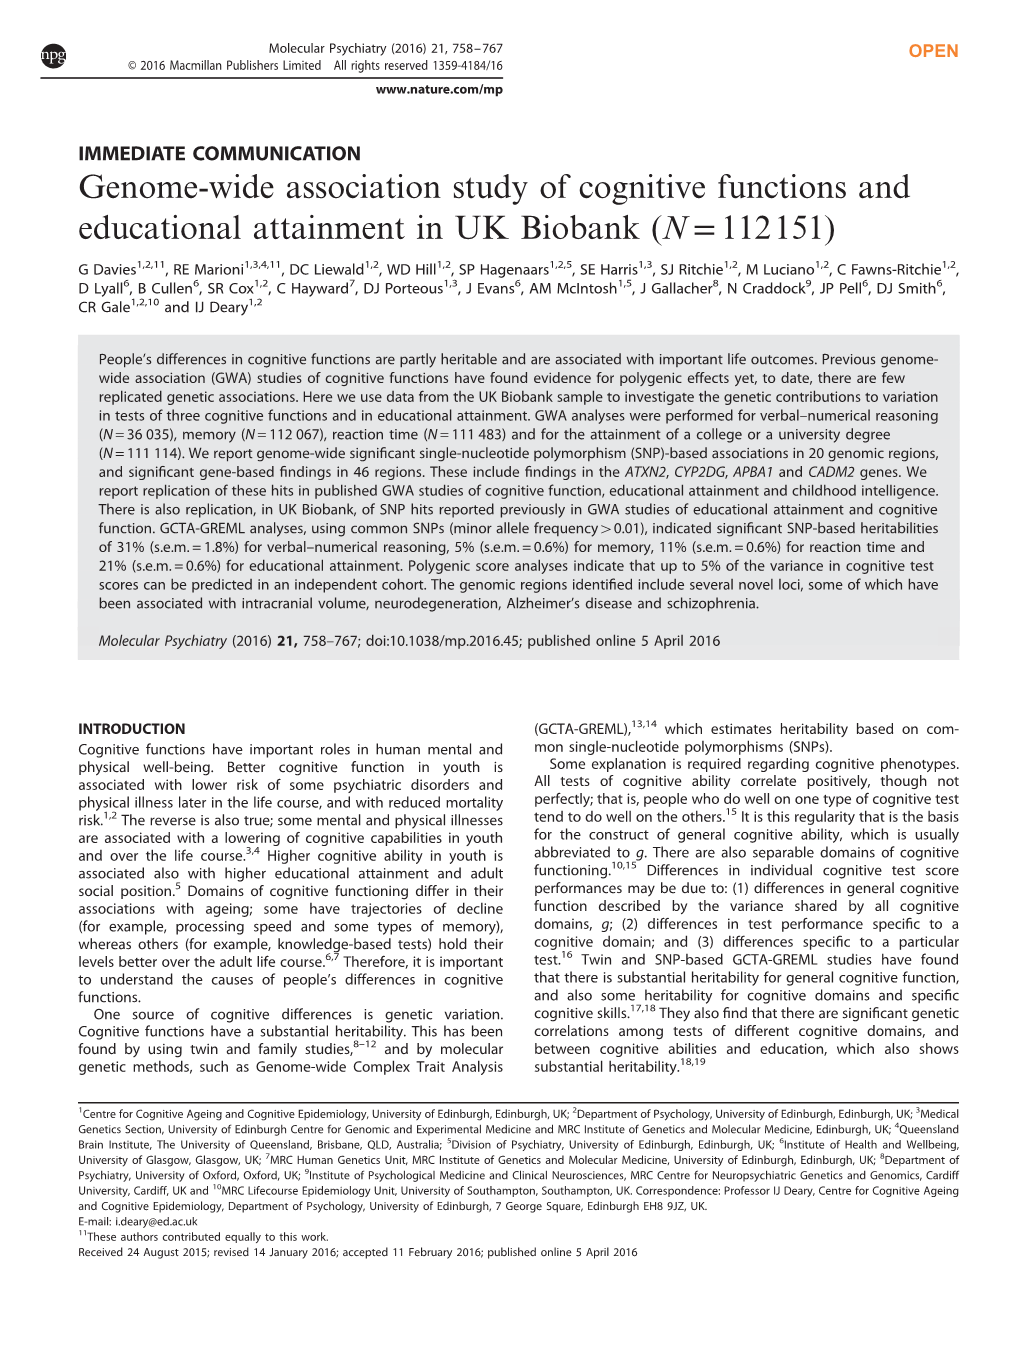 Genome-Wide Association Study of Cognitive Functions and Educational Attainment in UK Biobank (N = 112151)